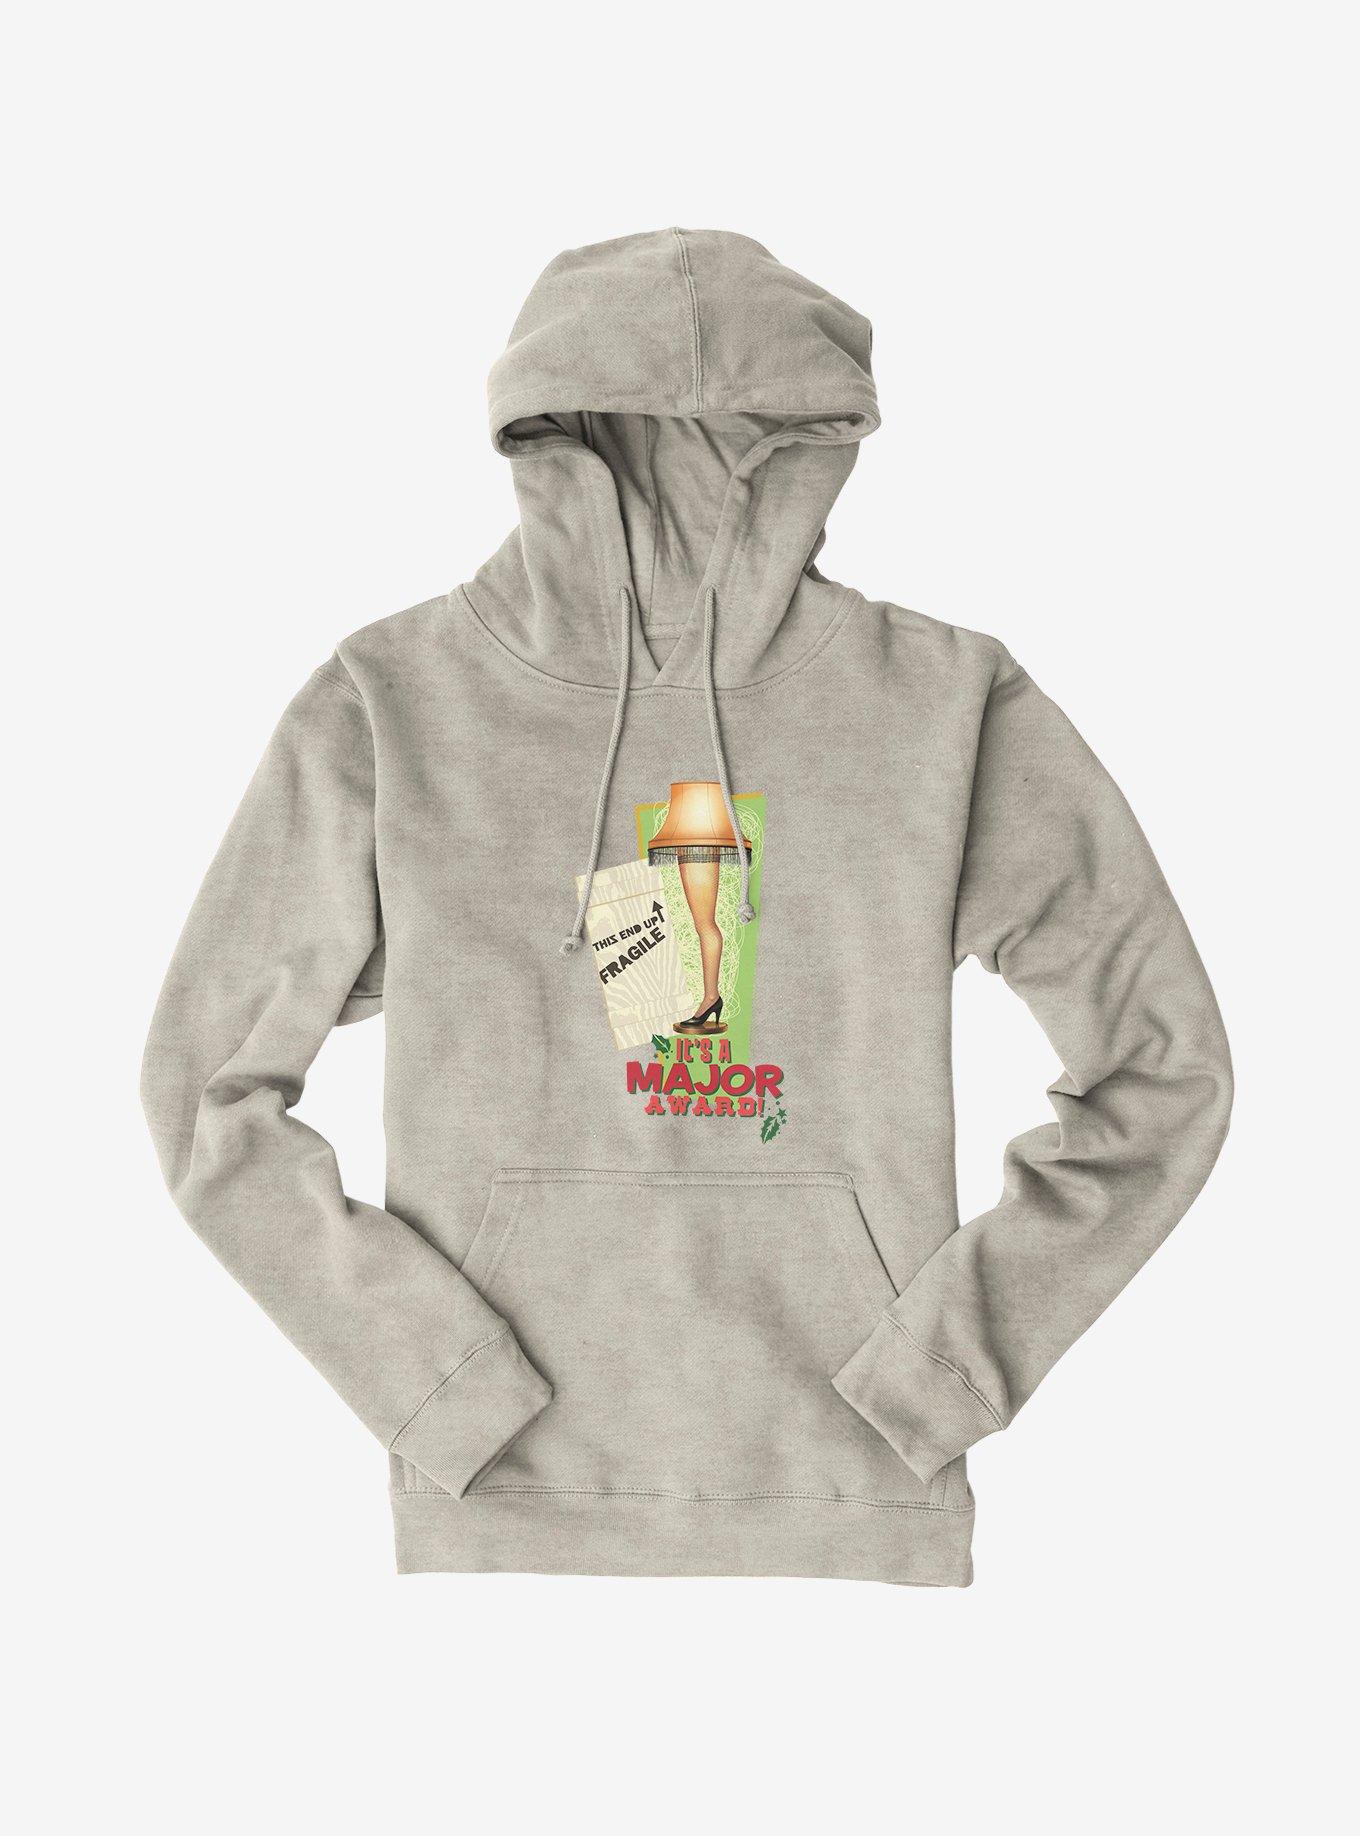 A Christmas Story This End Up Fragile Leg Lamp Hoodie